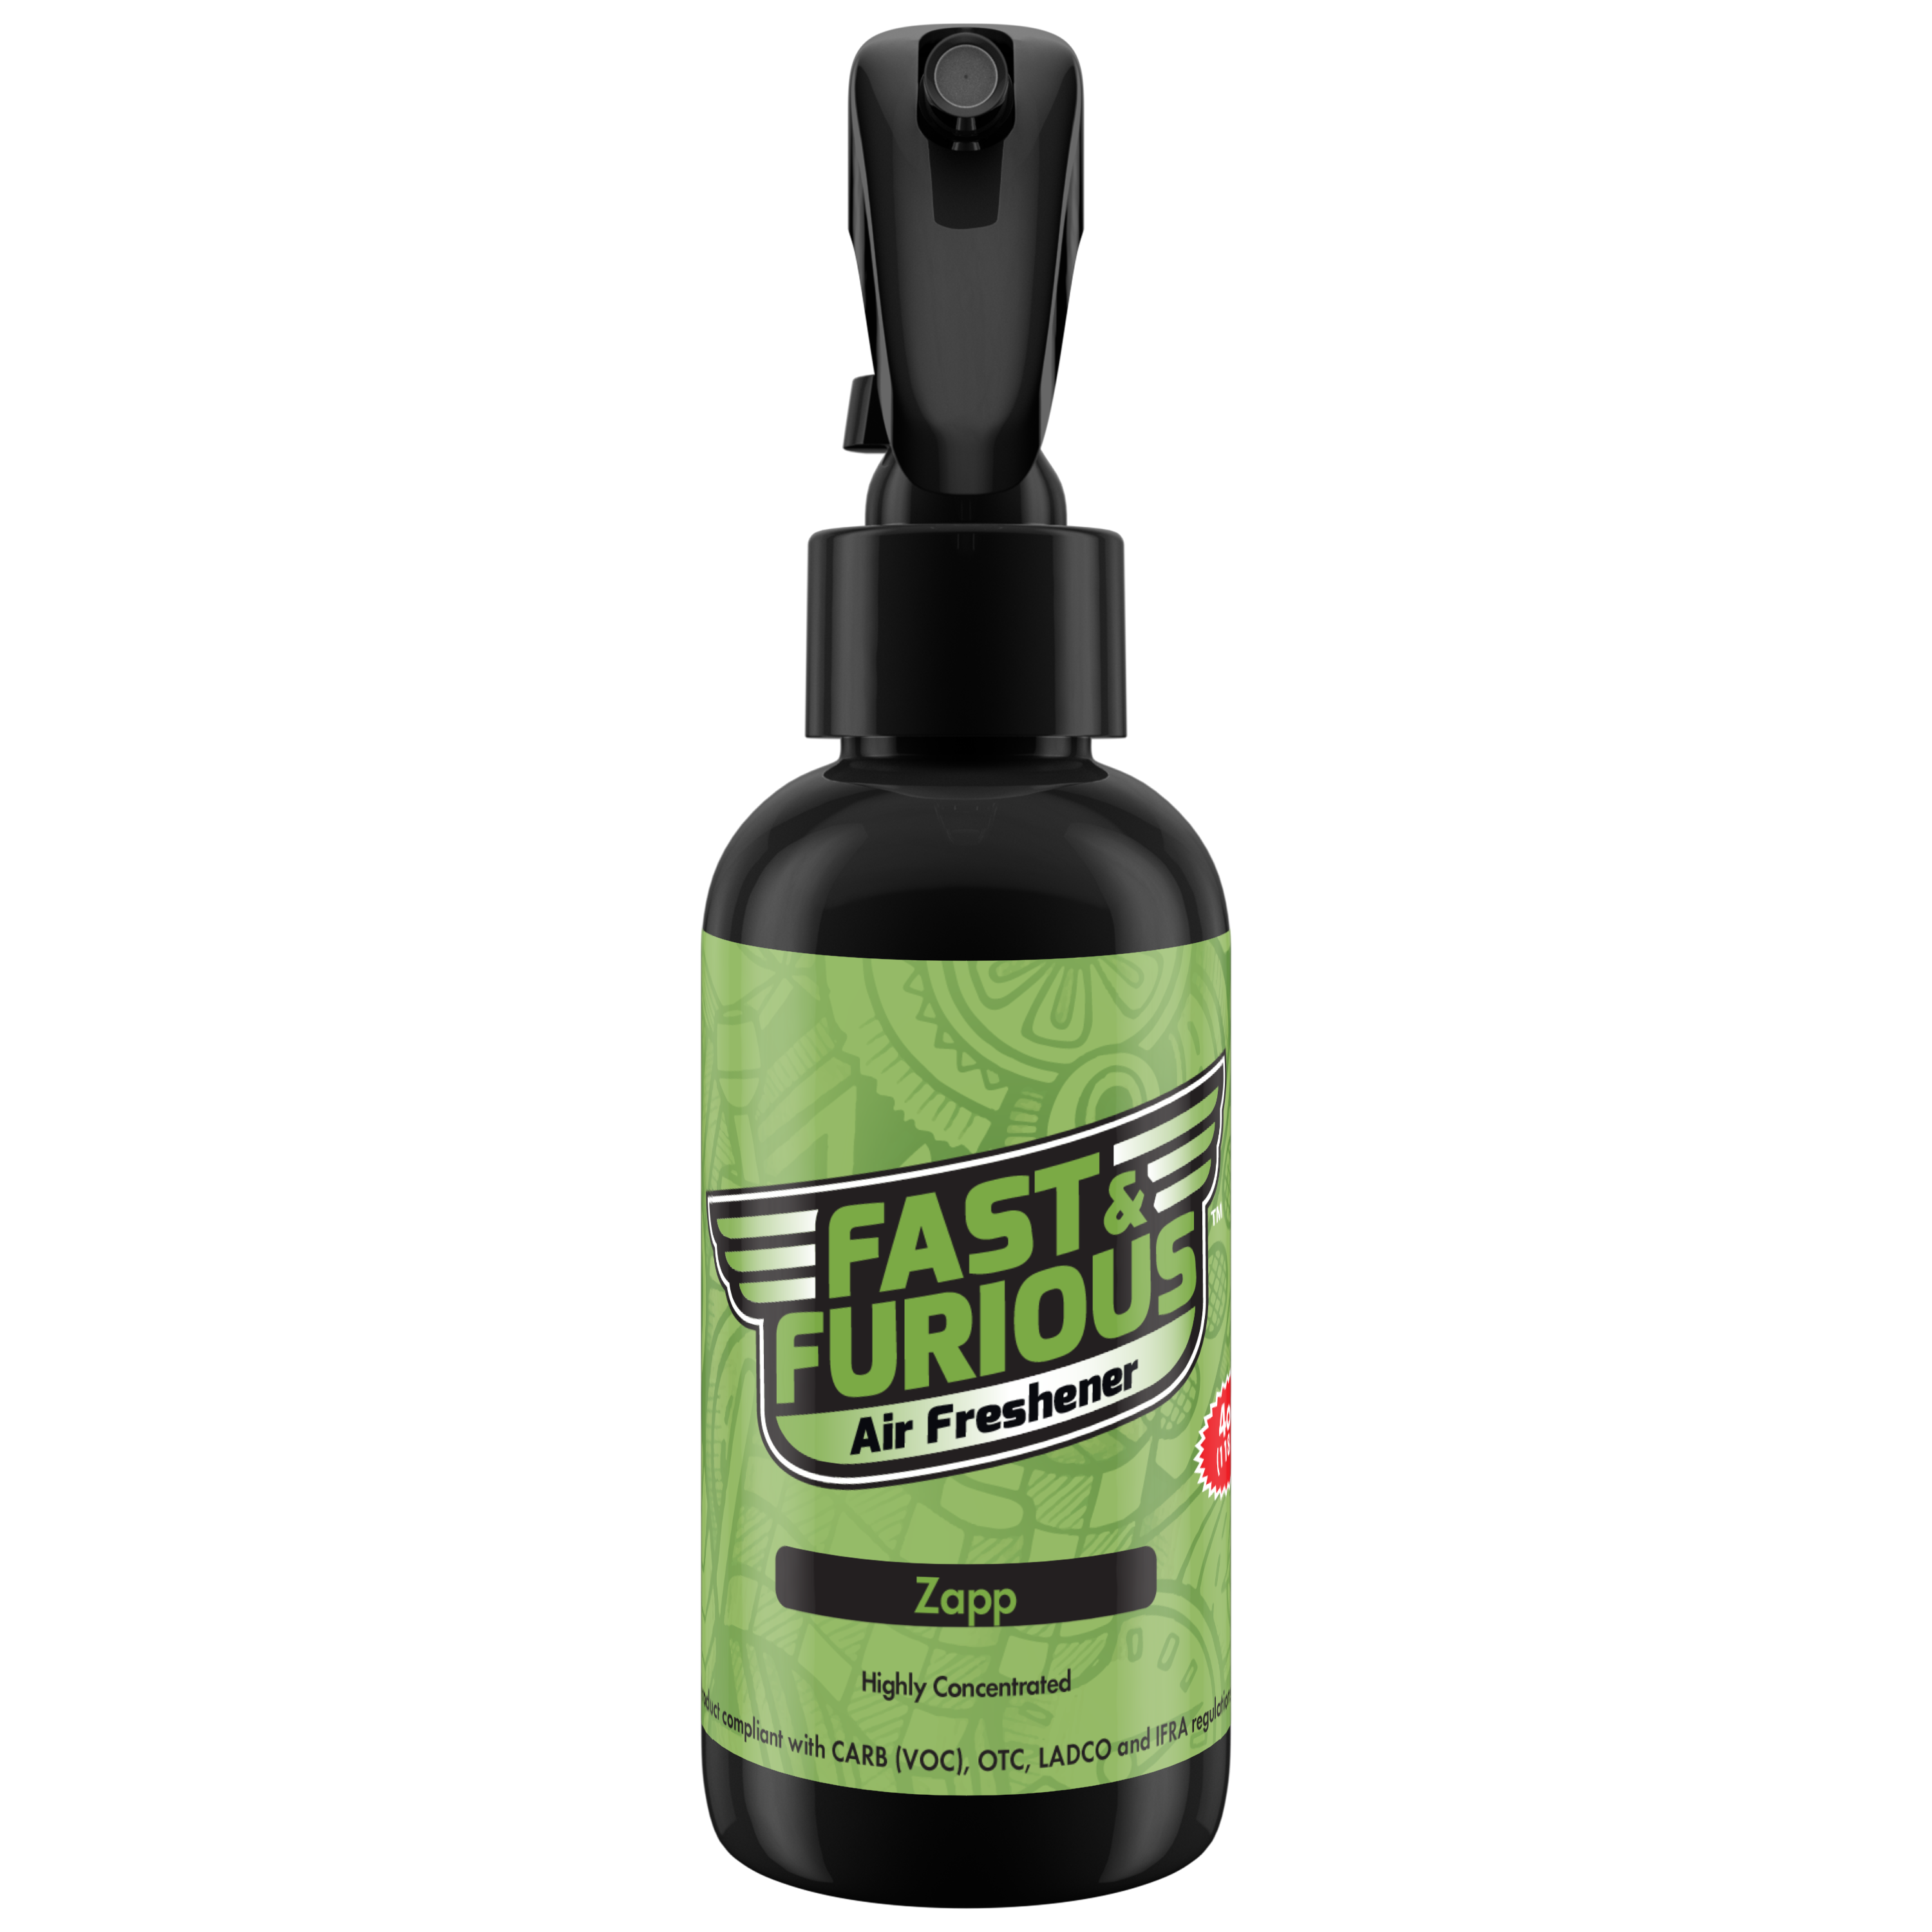 Fast and Furious Air Freshener - Zapp Scent